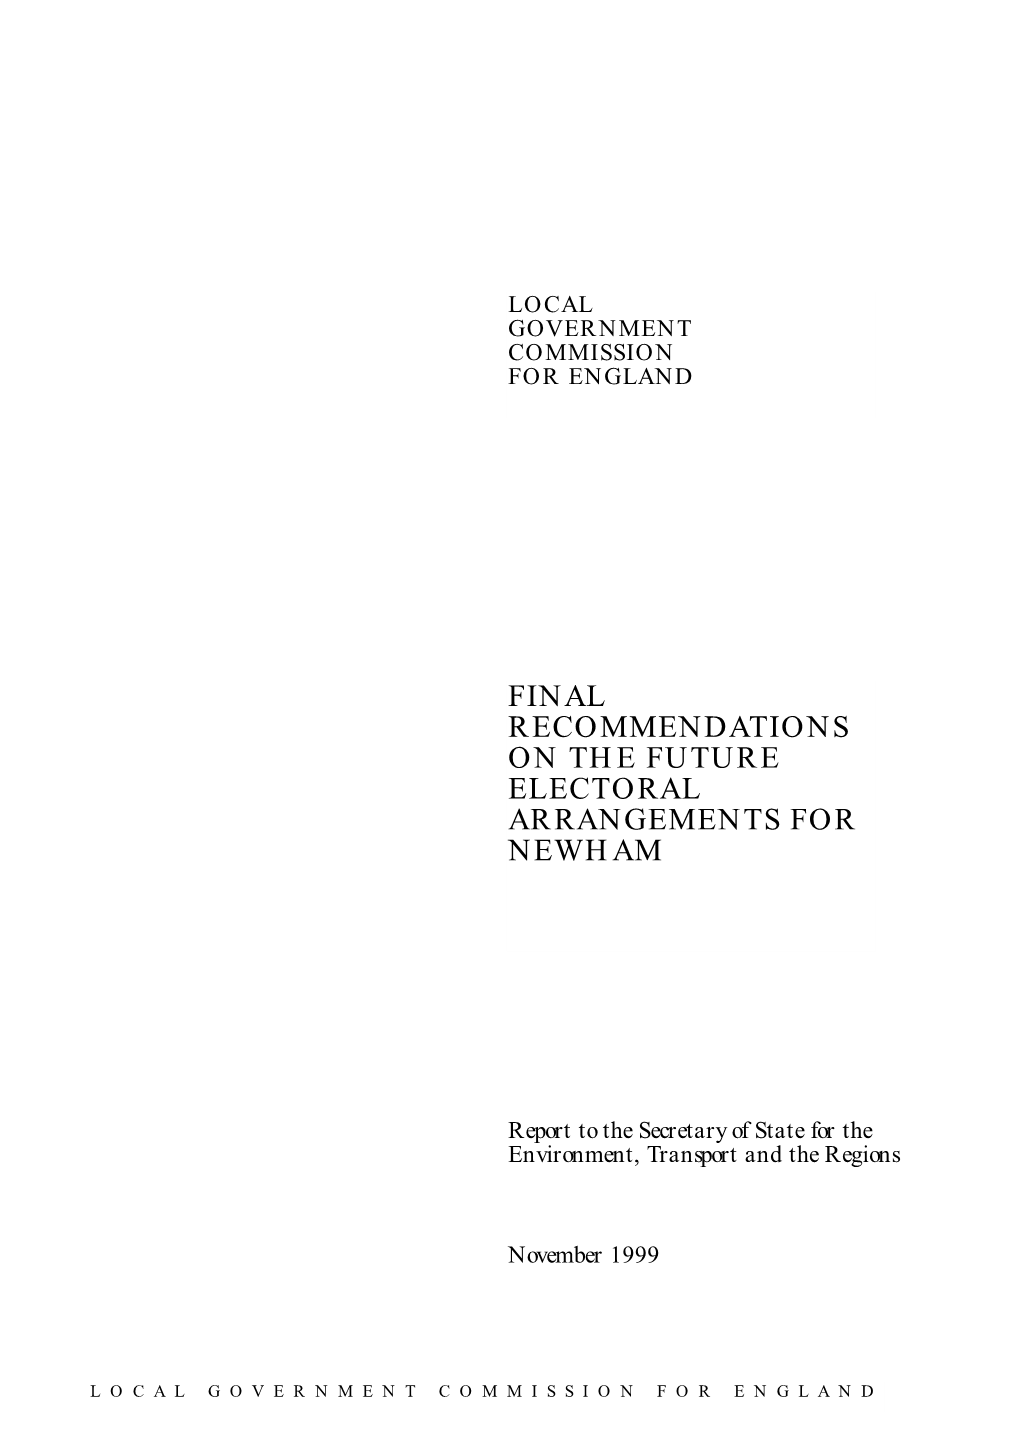 Final Recommendations on the Future Electoral Arrangements for Newham